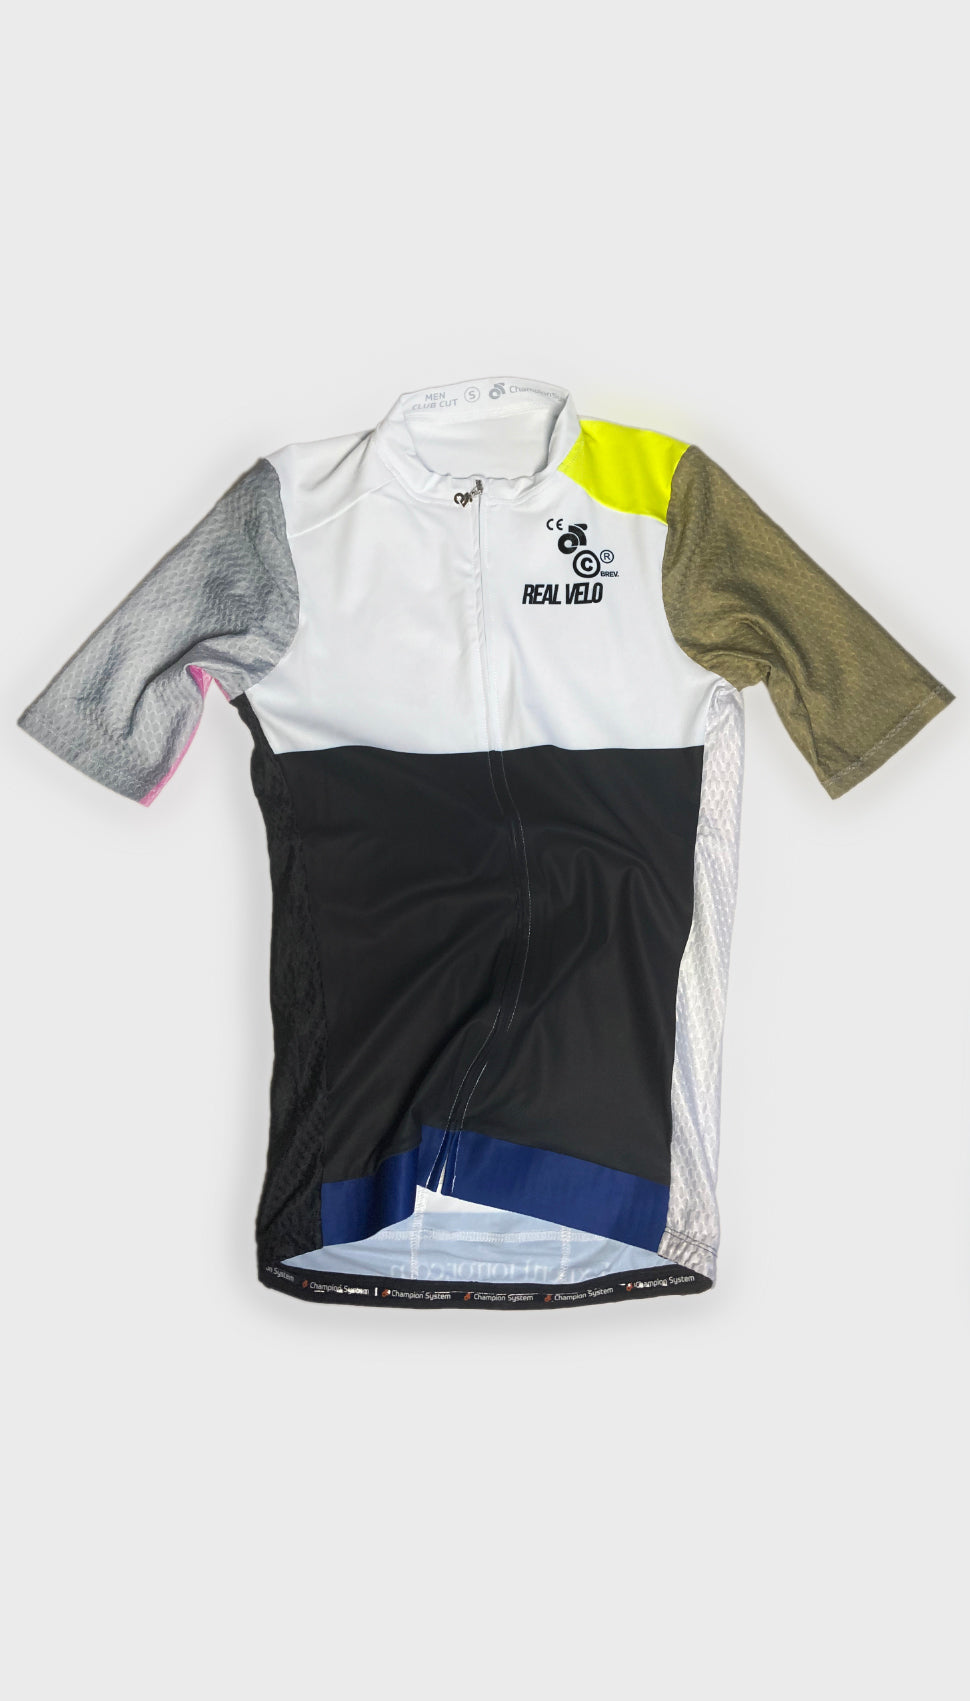 Real Velo X Expert Horror Multi-Colour Race Fit Cycling jersey